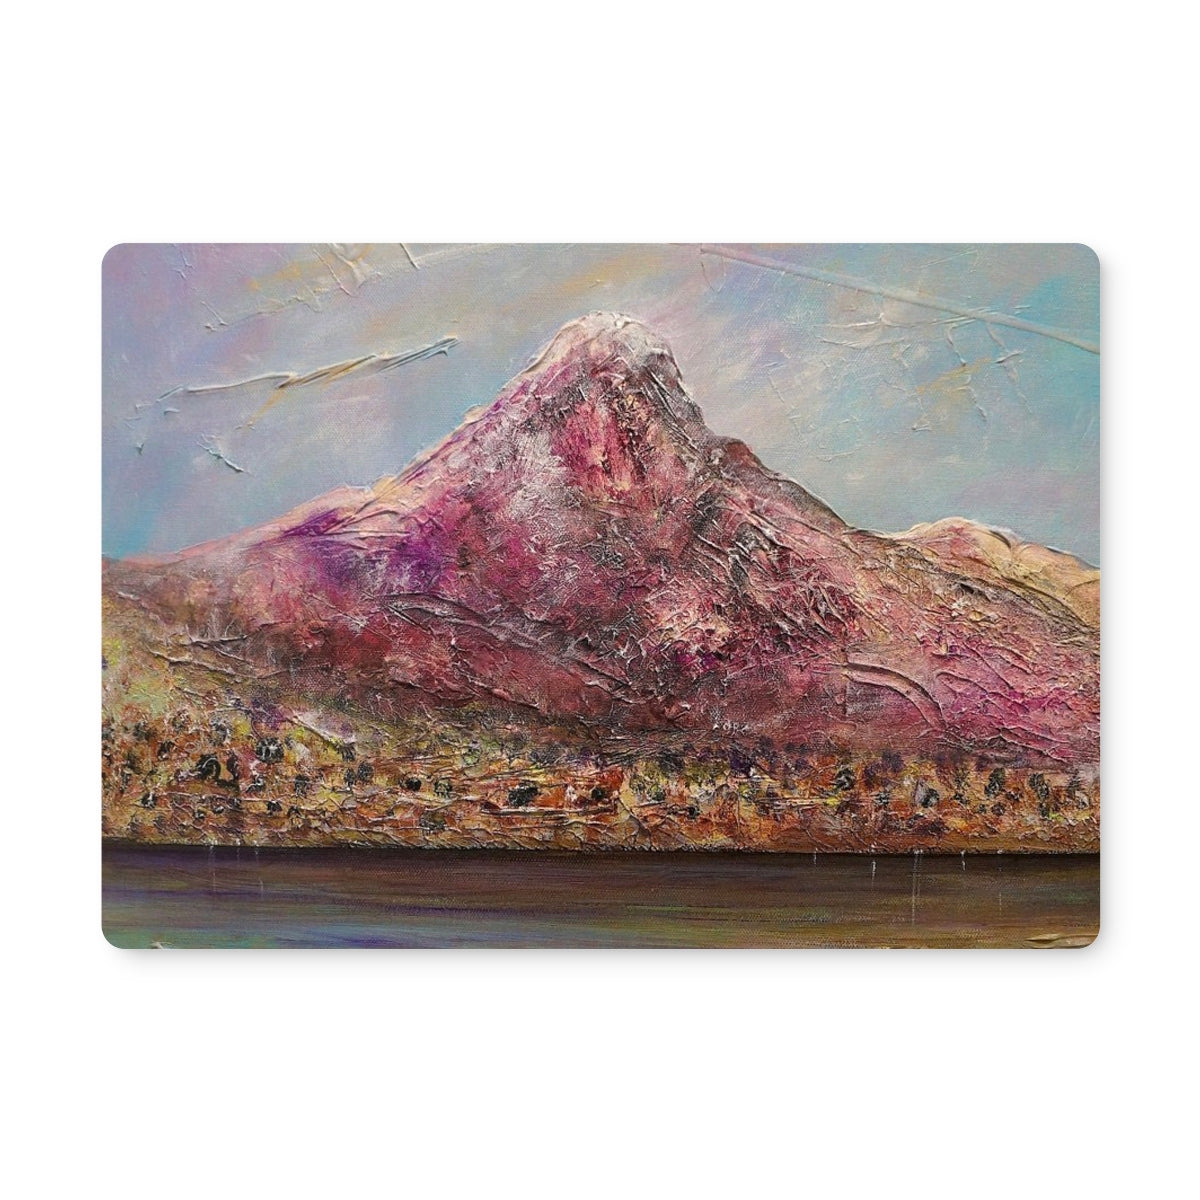 Ben Lomond Art Gifts Placemat-Placemats-Scottish Lochs & Mountains Art Gallery-2 Placemats-Paintings, Prints, Homeware, Art Gifts From Scotland By Scottish Artist Kevin Hunter